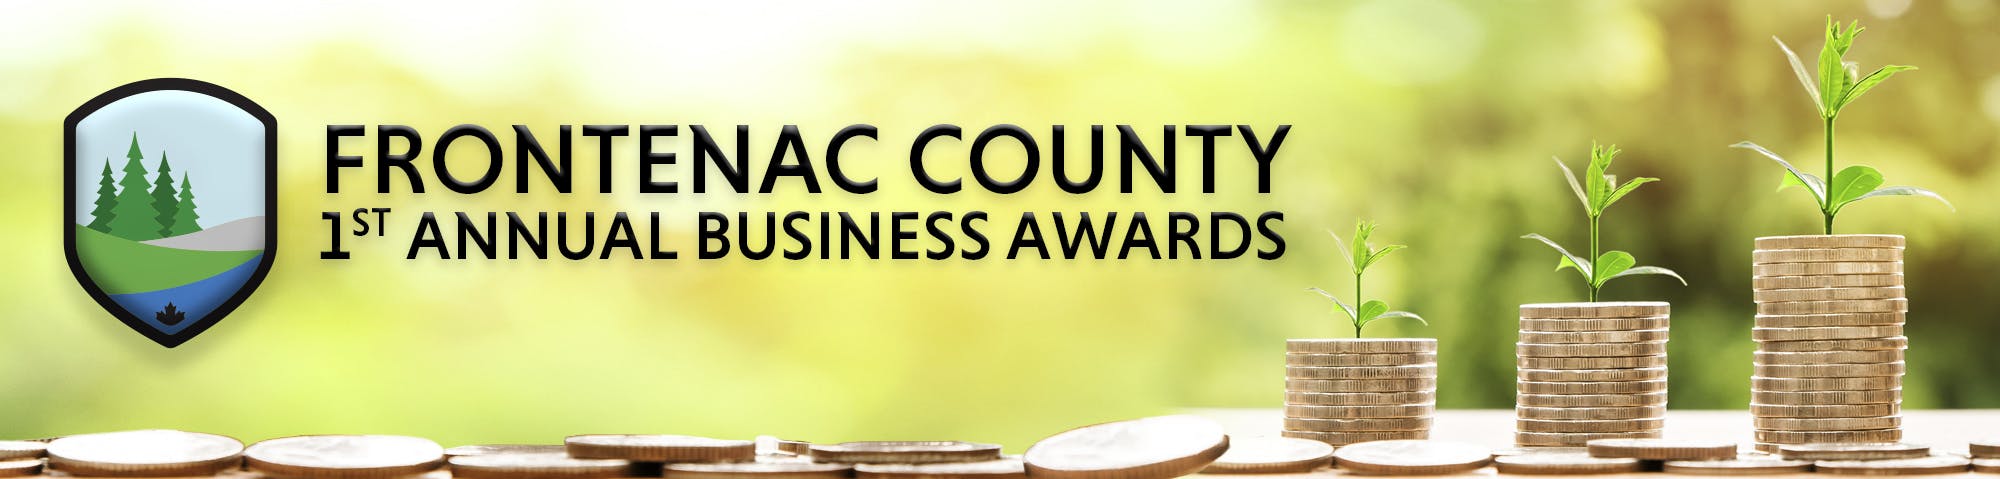 Frontenac County 1st Annual Business Awards